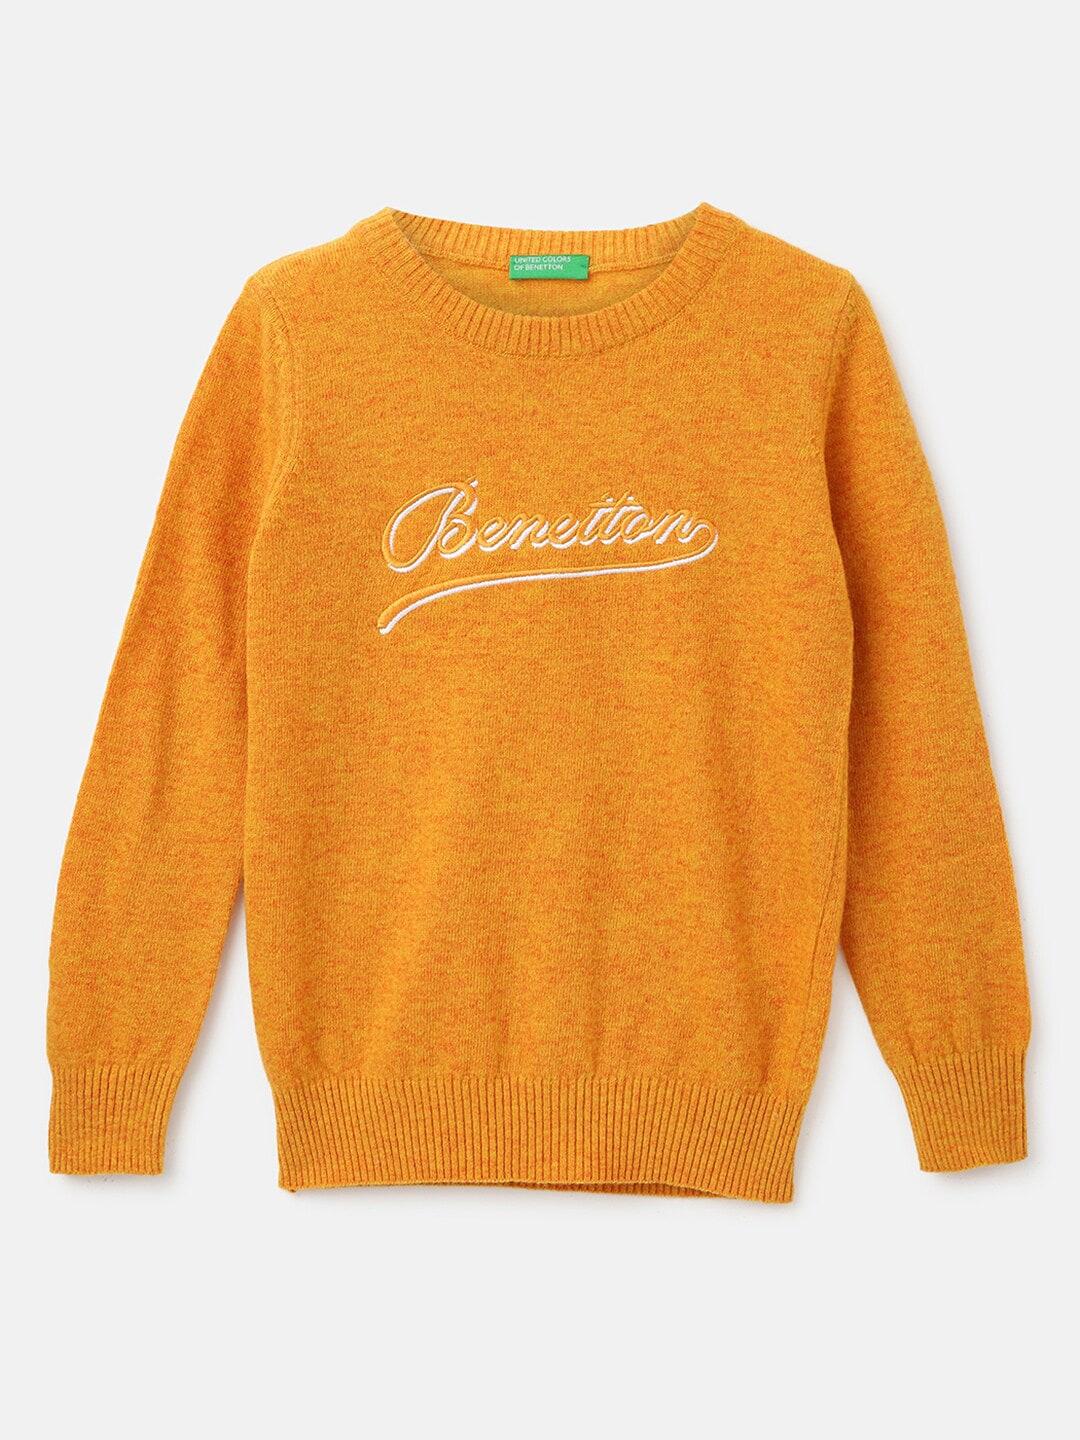 United Colors of Benetton Boys Typography Embroidered Pullover Sweater